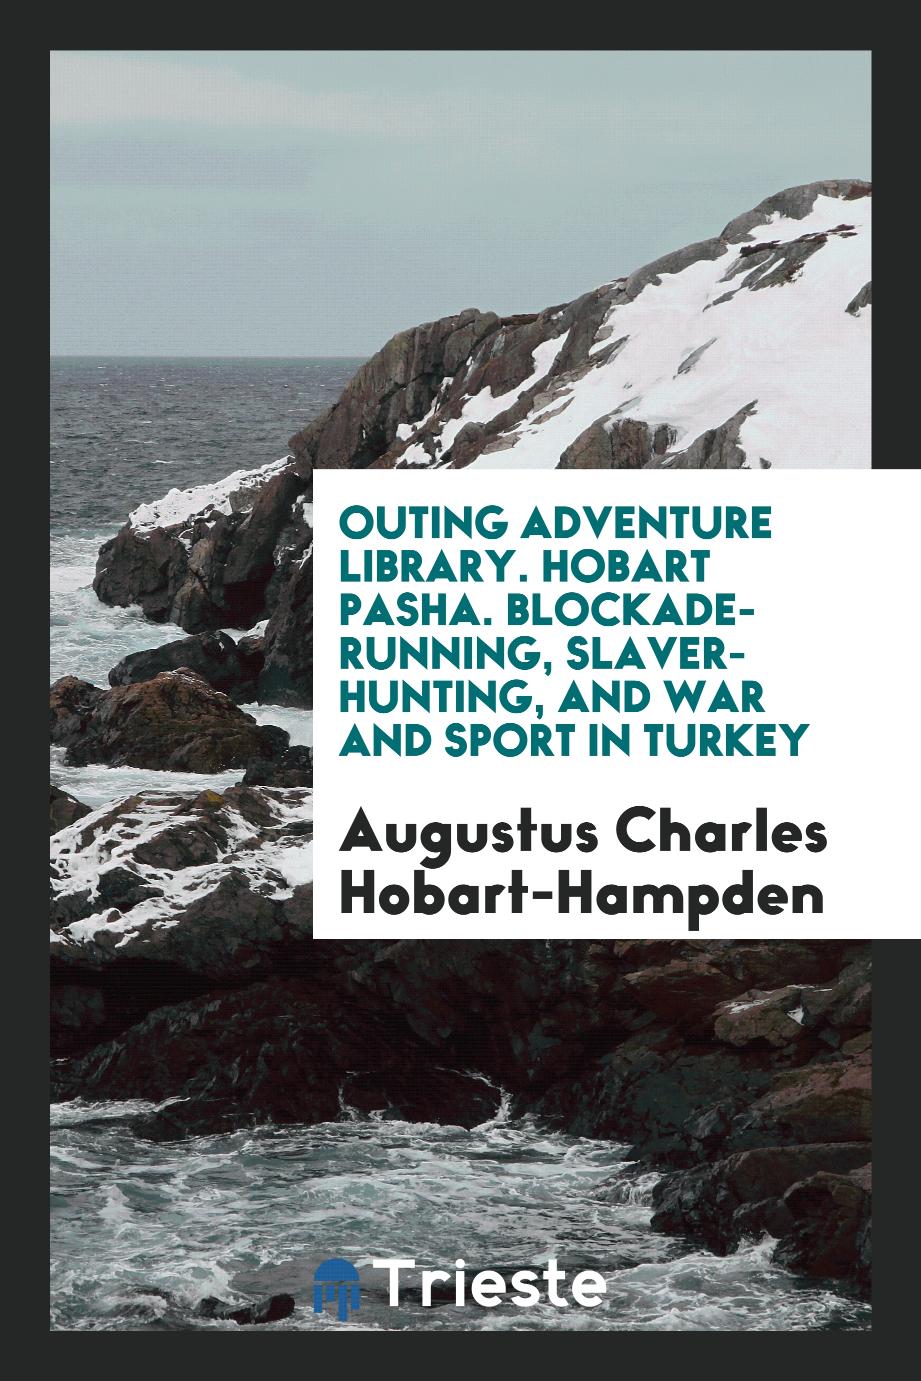 Outing Adventure Library. Hobart Pasha. Blockade-Running, Slaver-Hunting, and War and Sport in Turkey